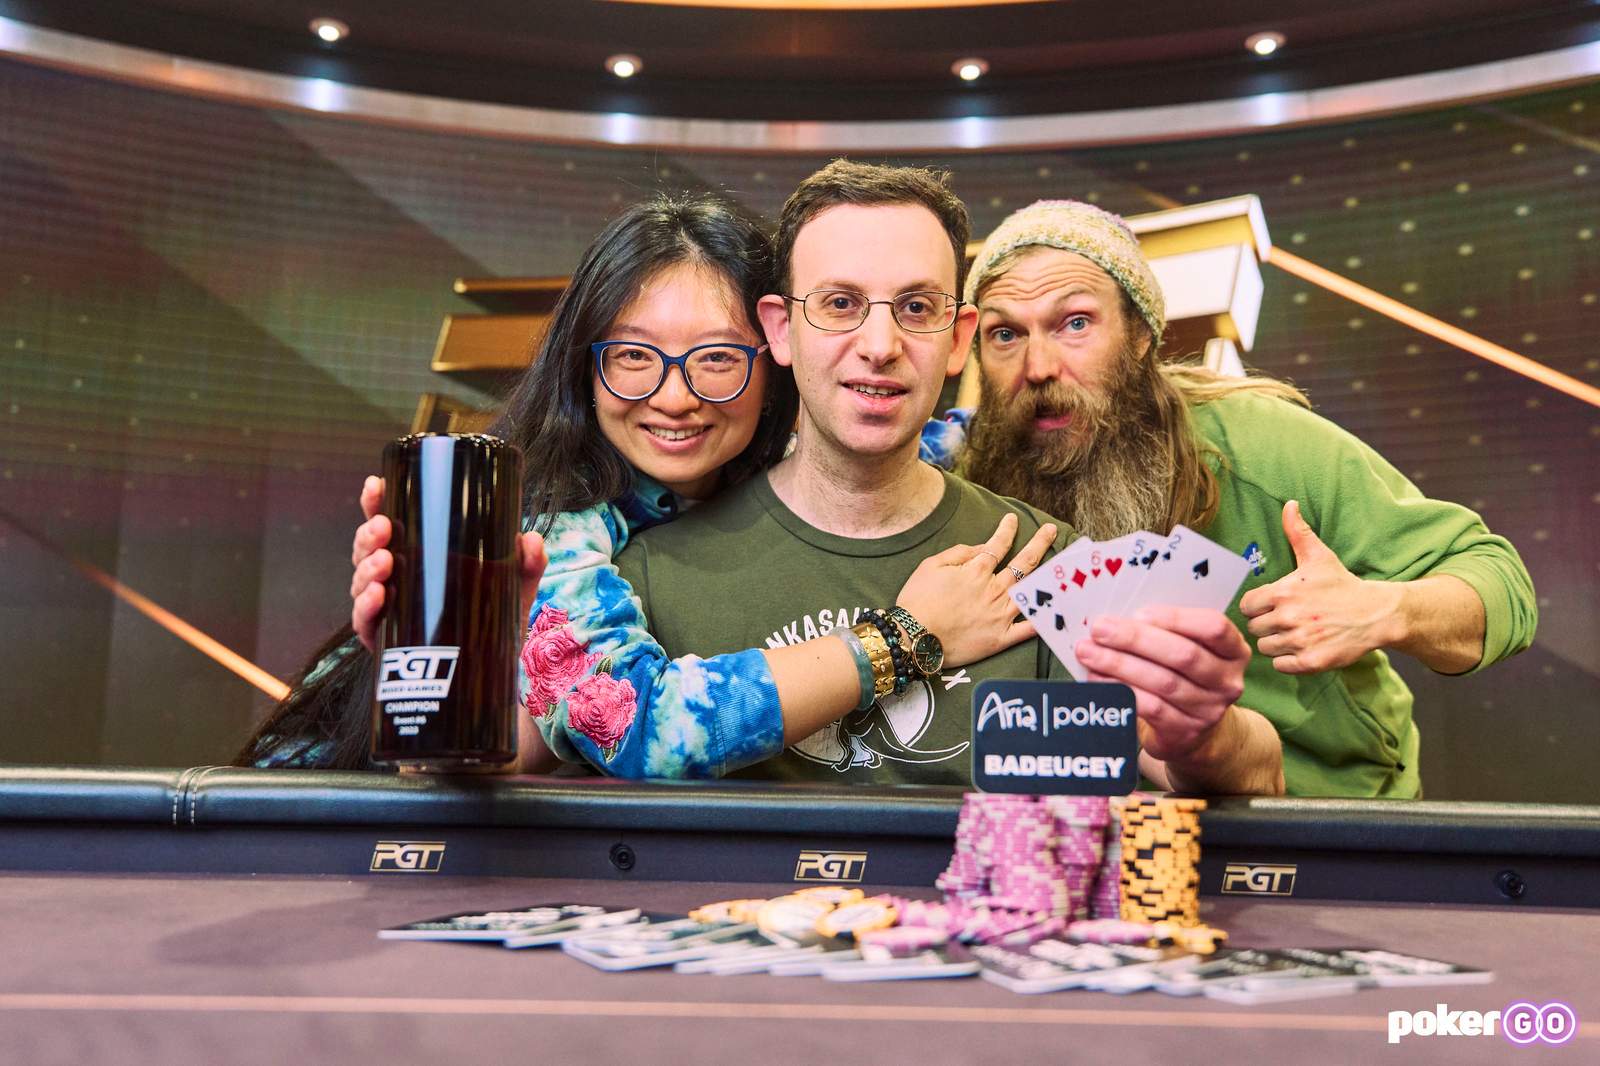 Scott Abrams Wins PGT Mixed Games Event #6 for $179,200